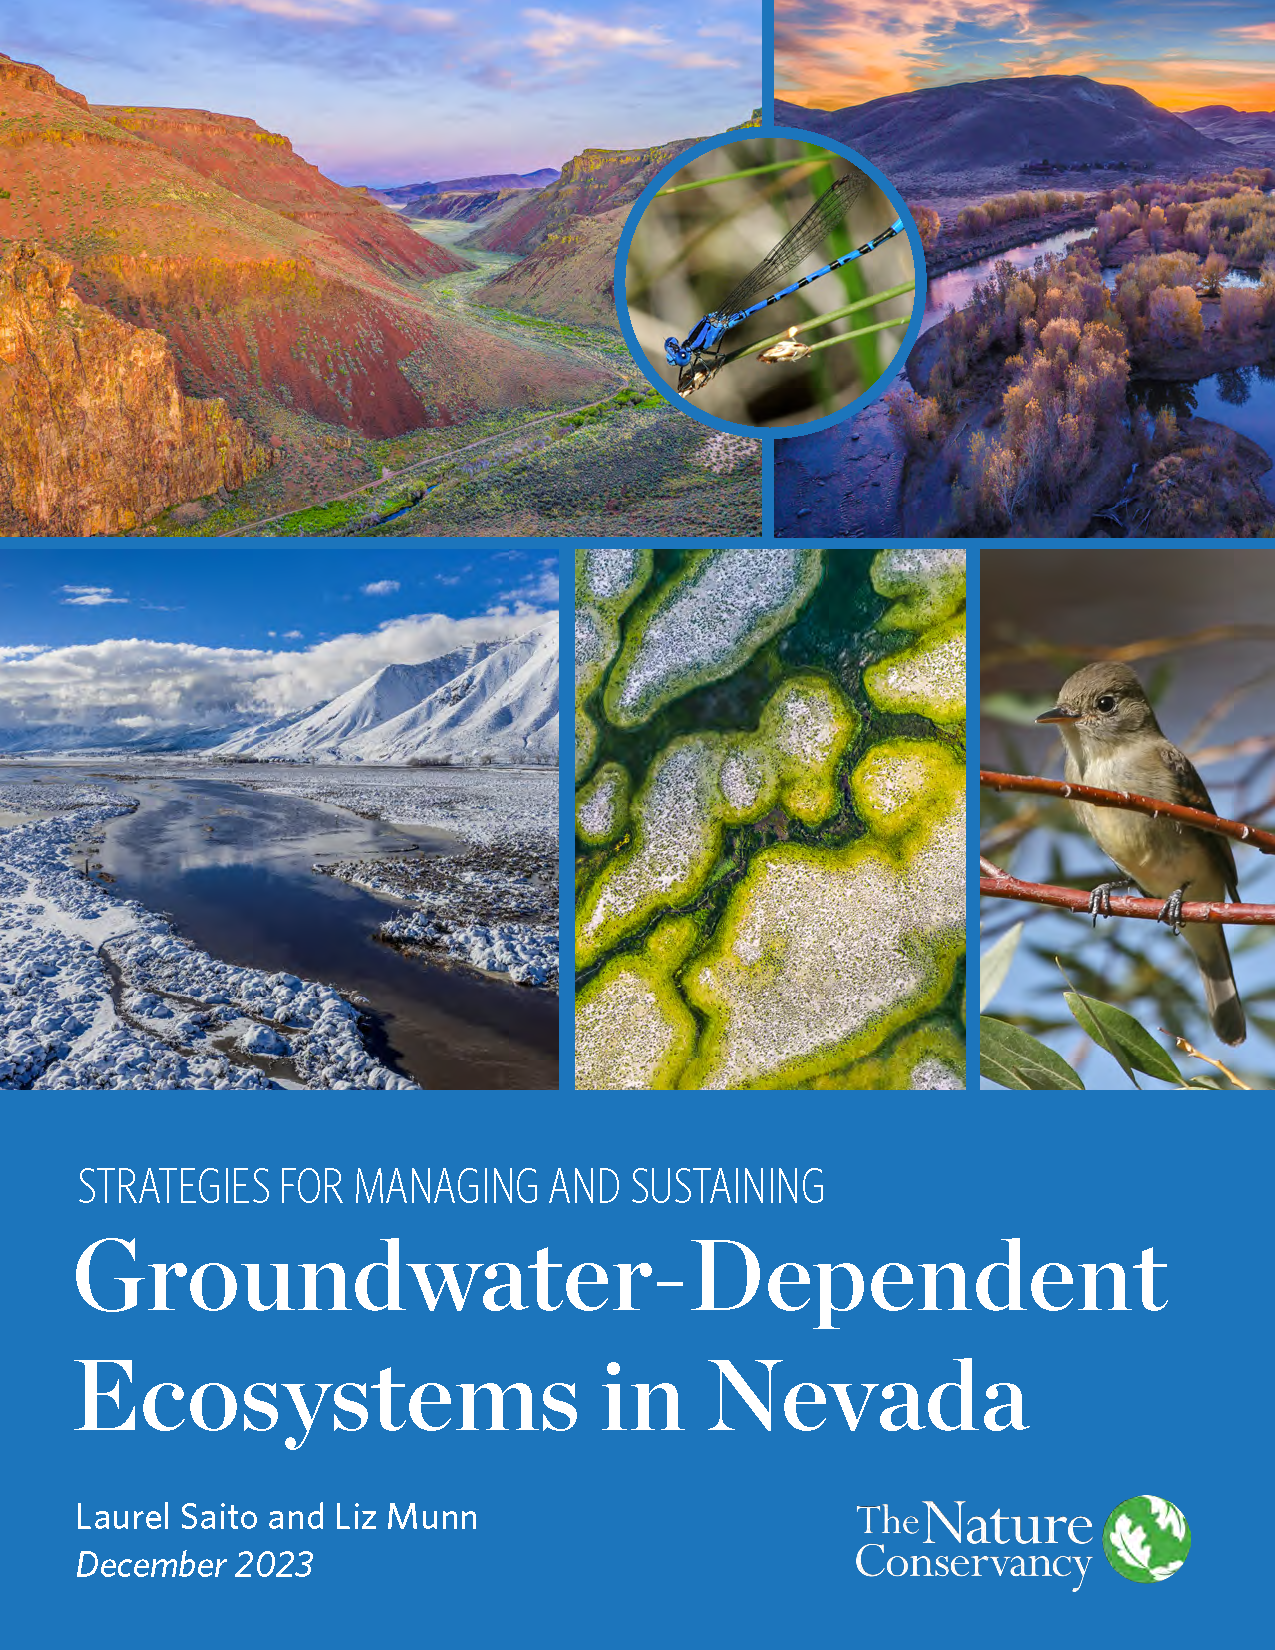 Strategies for Managing and Sustaining Groundwater-Dependent Ecosystems in Nevada